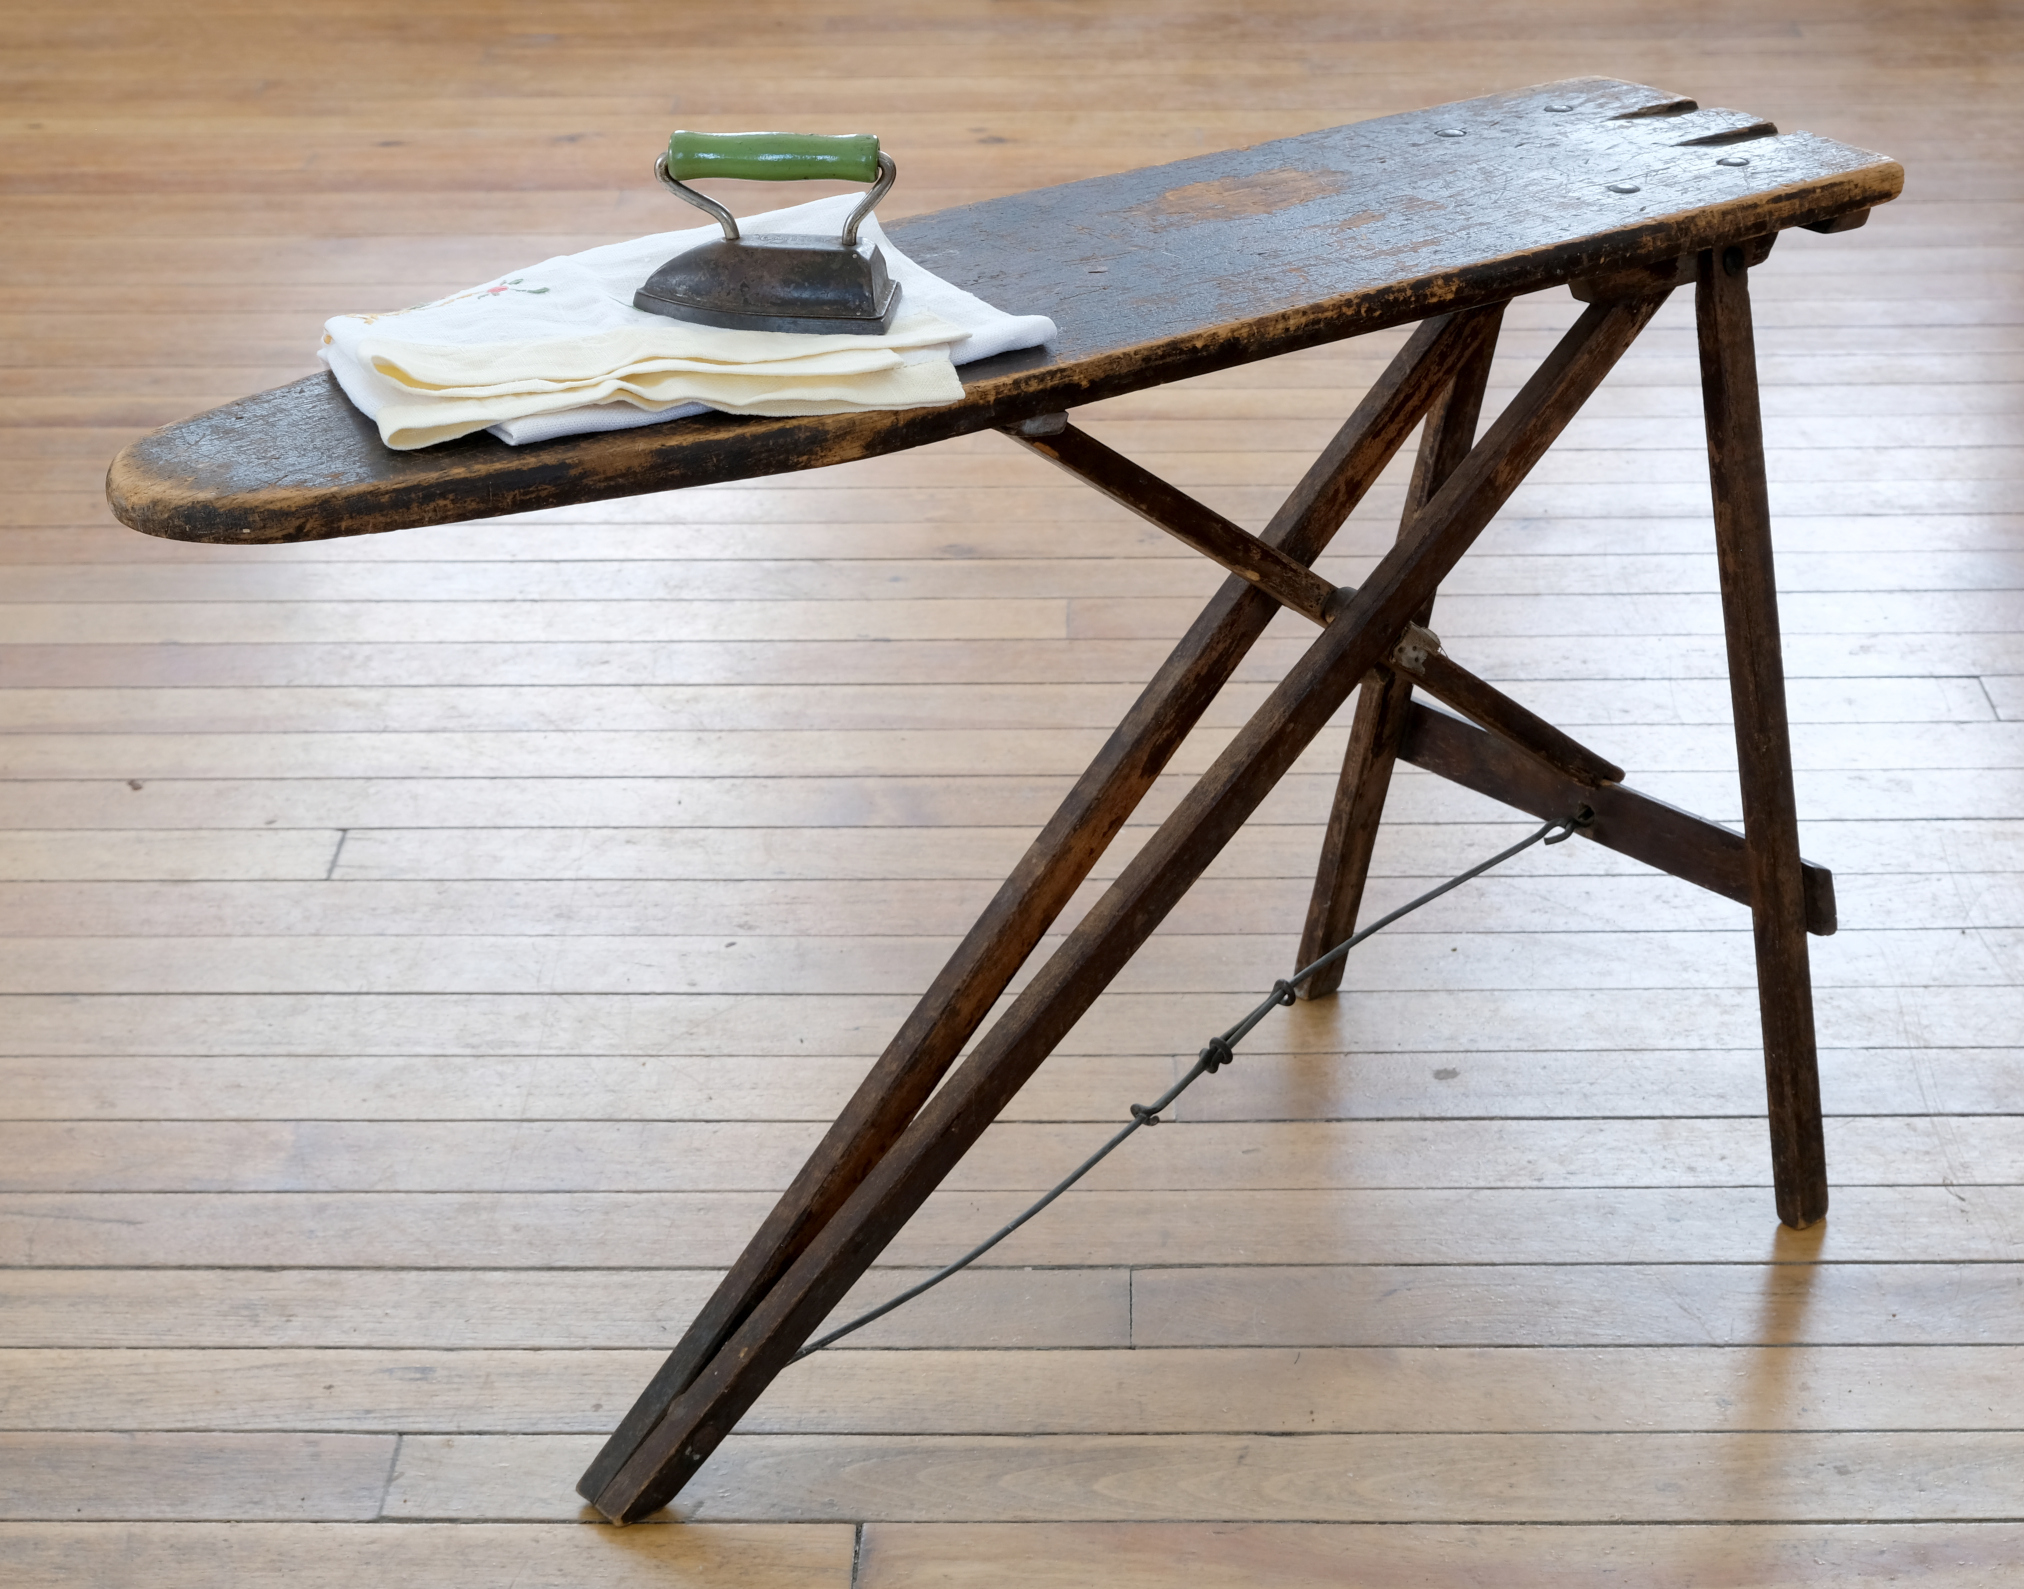 The Museum's child's ironing board with a mini iron and cloth on top